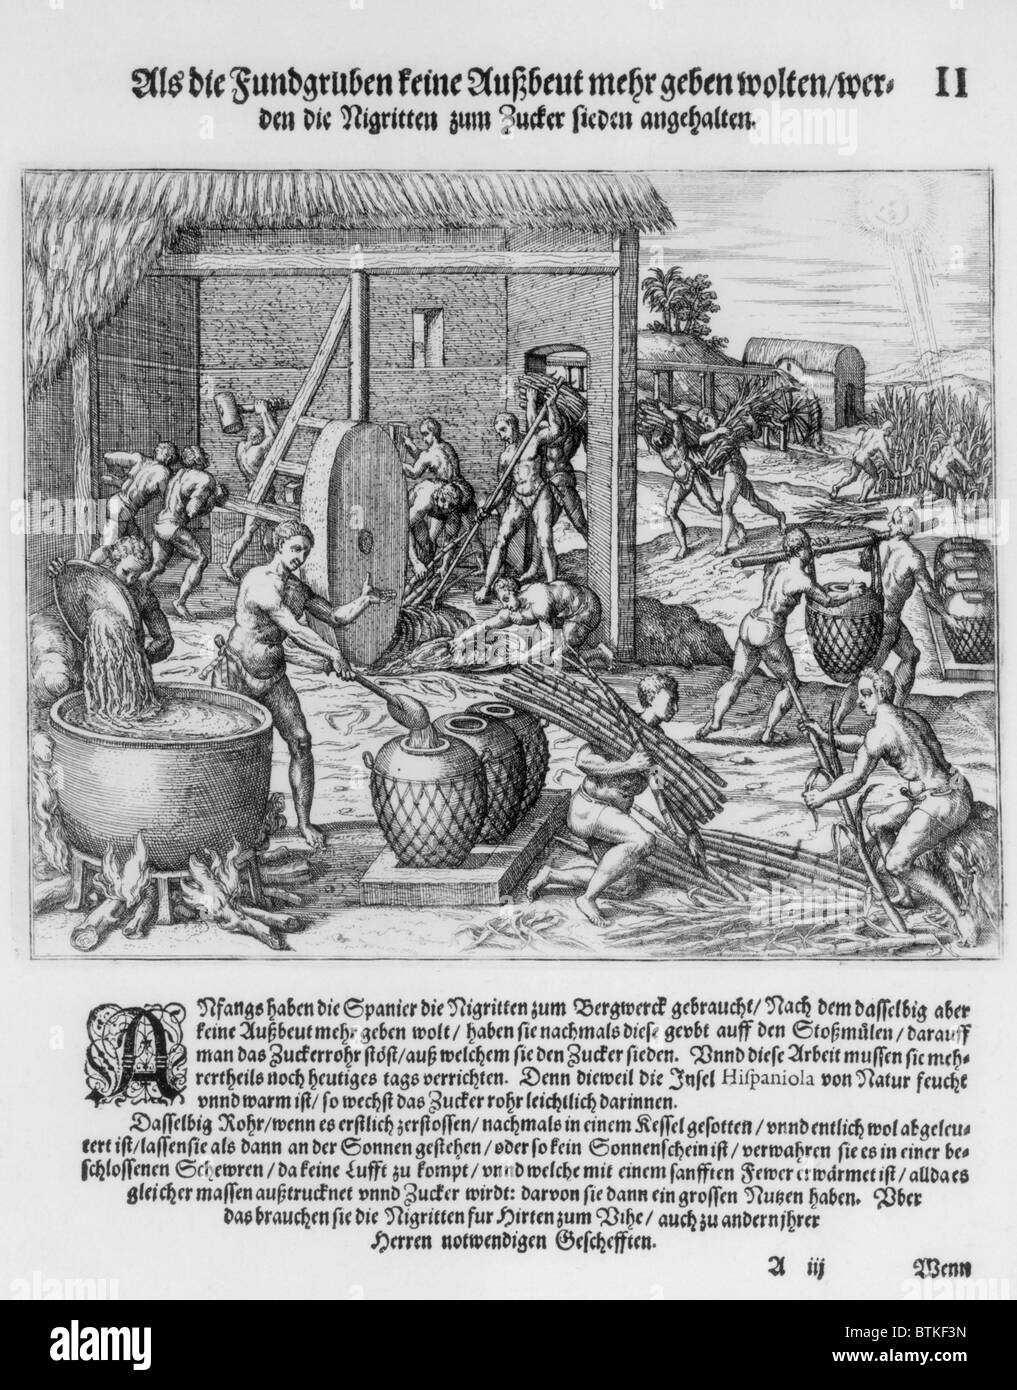 African slaves processing sugar cane on Hispaniola. 1595 engraving by Theodor de Bry show harvesting the cane, a slave powered grinding mill, and boiling cane juice. Stock Photo